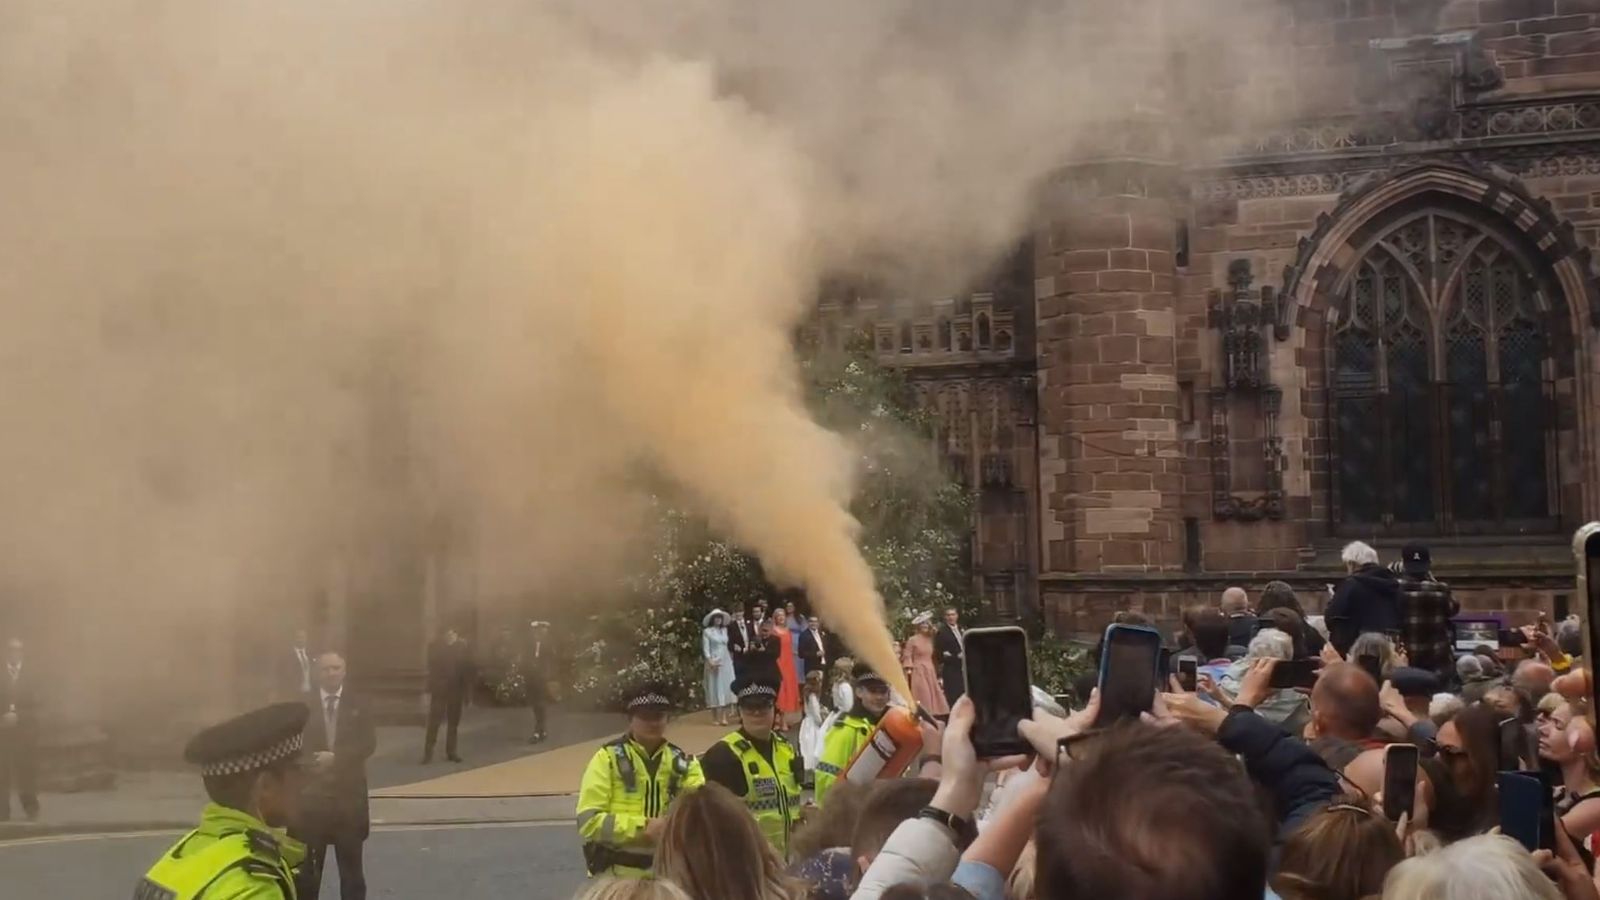 Duke of Westminster wedding: Protester sets off fire extinguisher outside Chester Cathedral